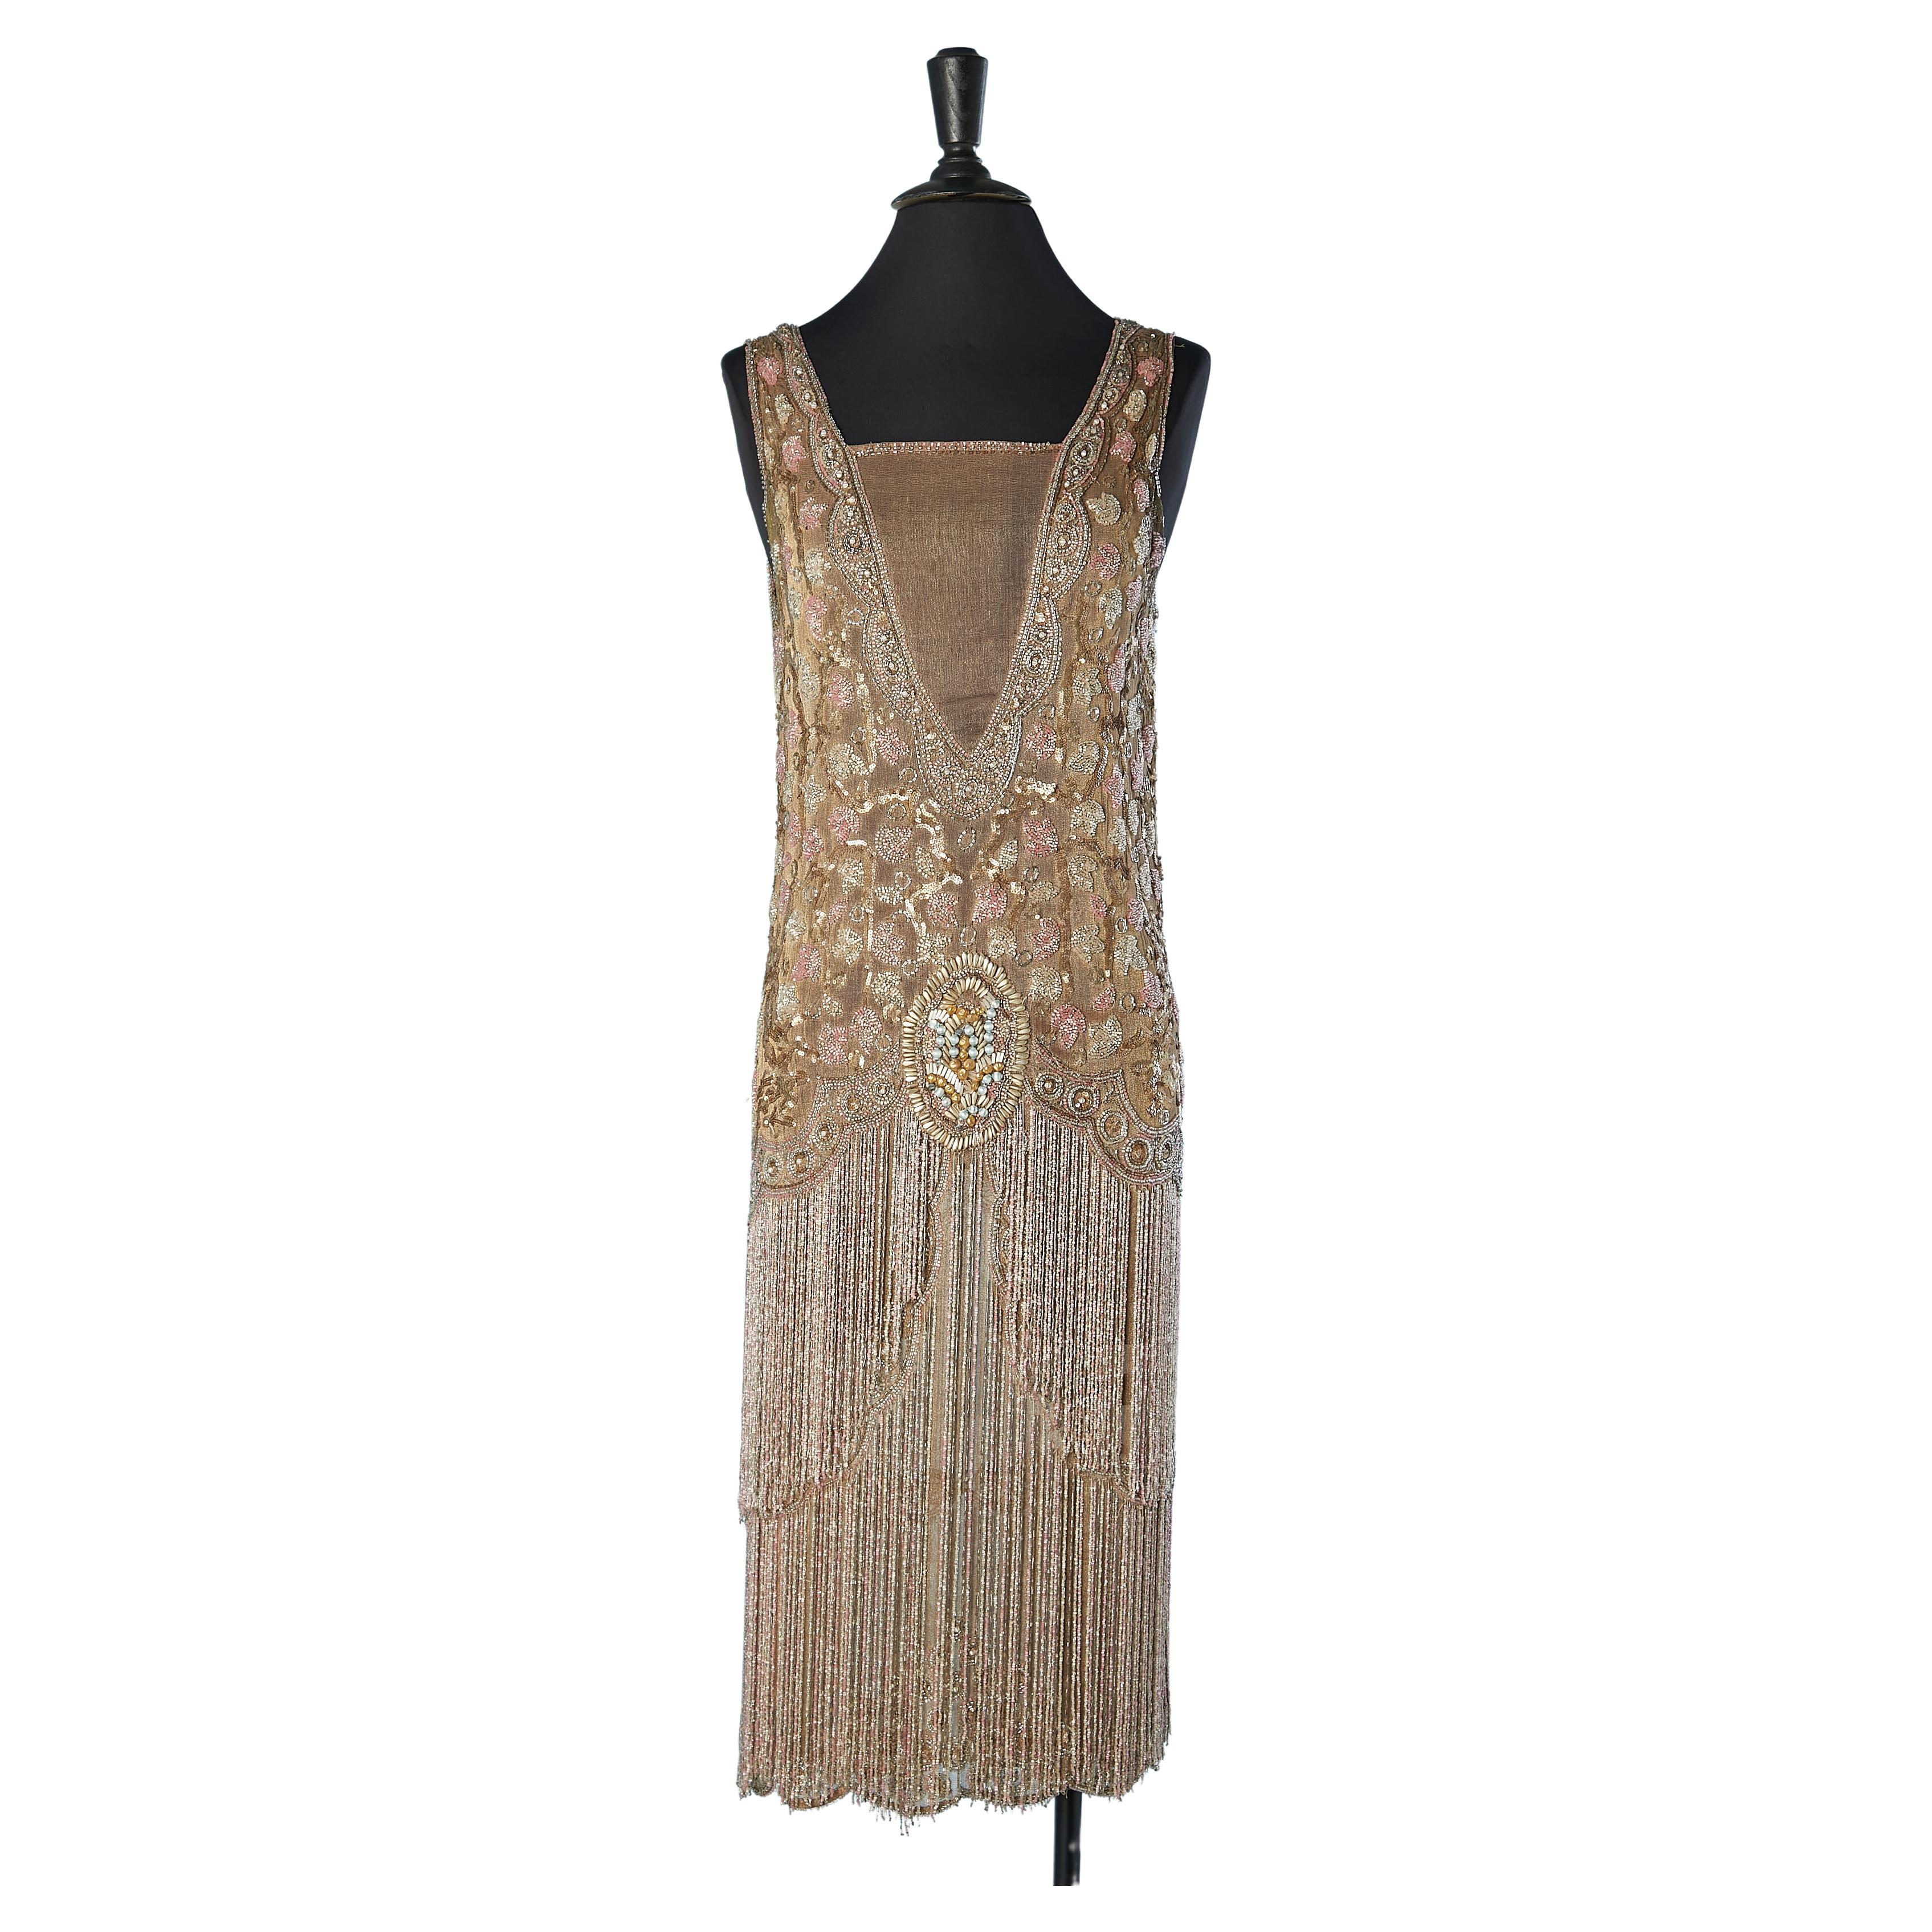 Rare full beaded cocktail dress with beads fringes Circa 1925's 